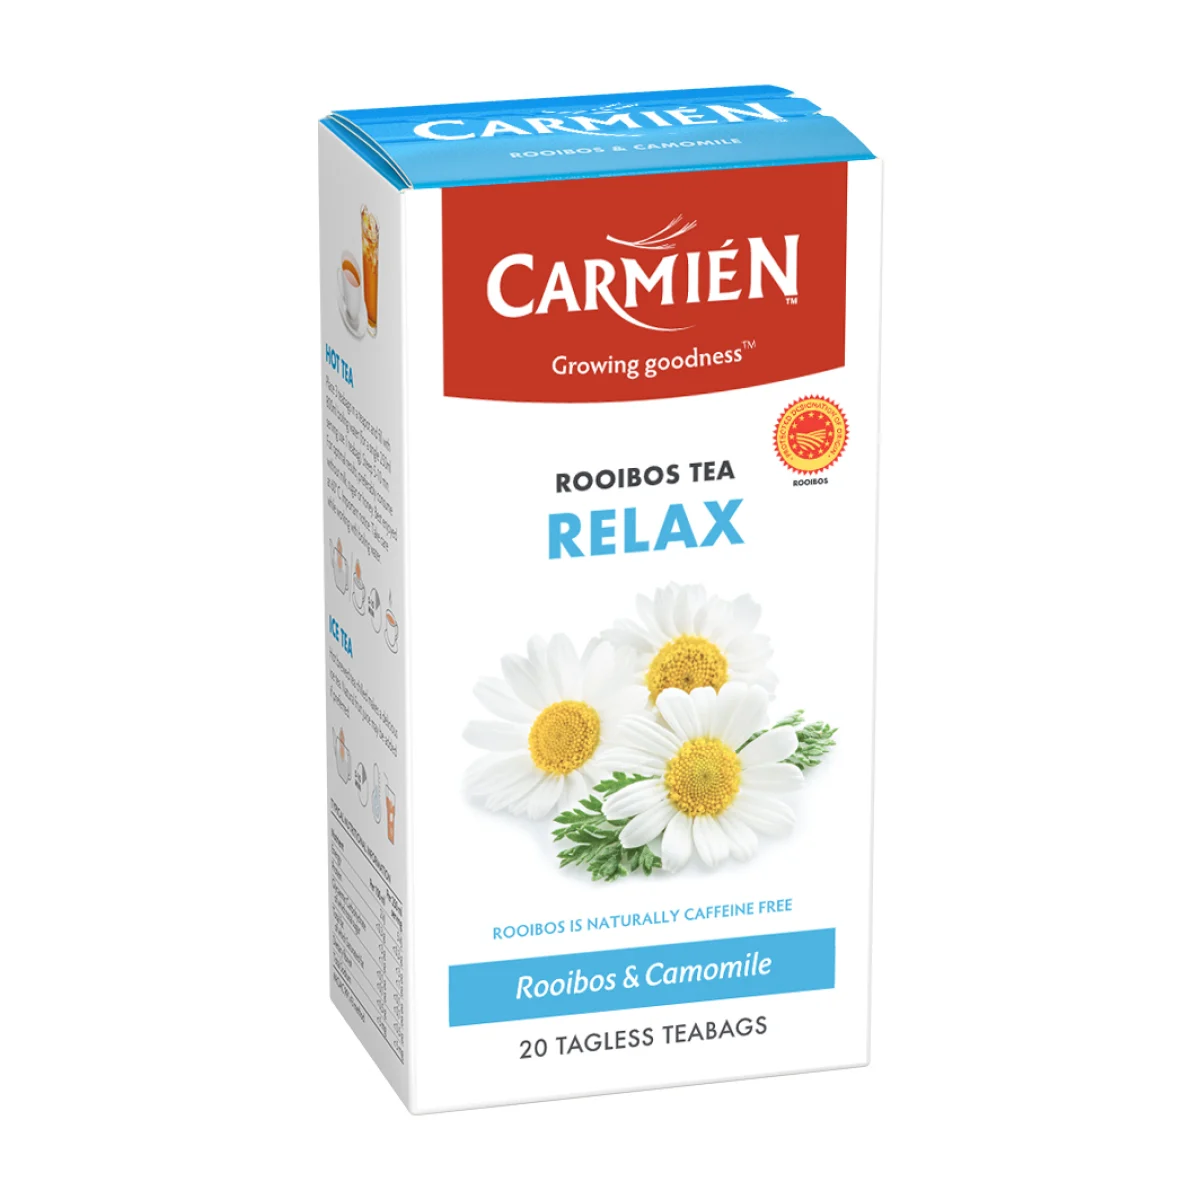 Thé Relaxation Rooibos Camomille 46g, sachets de thé